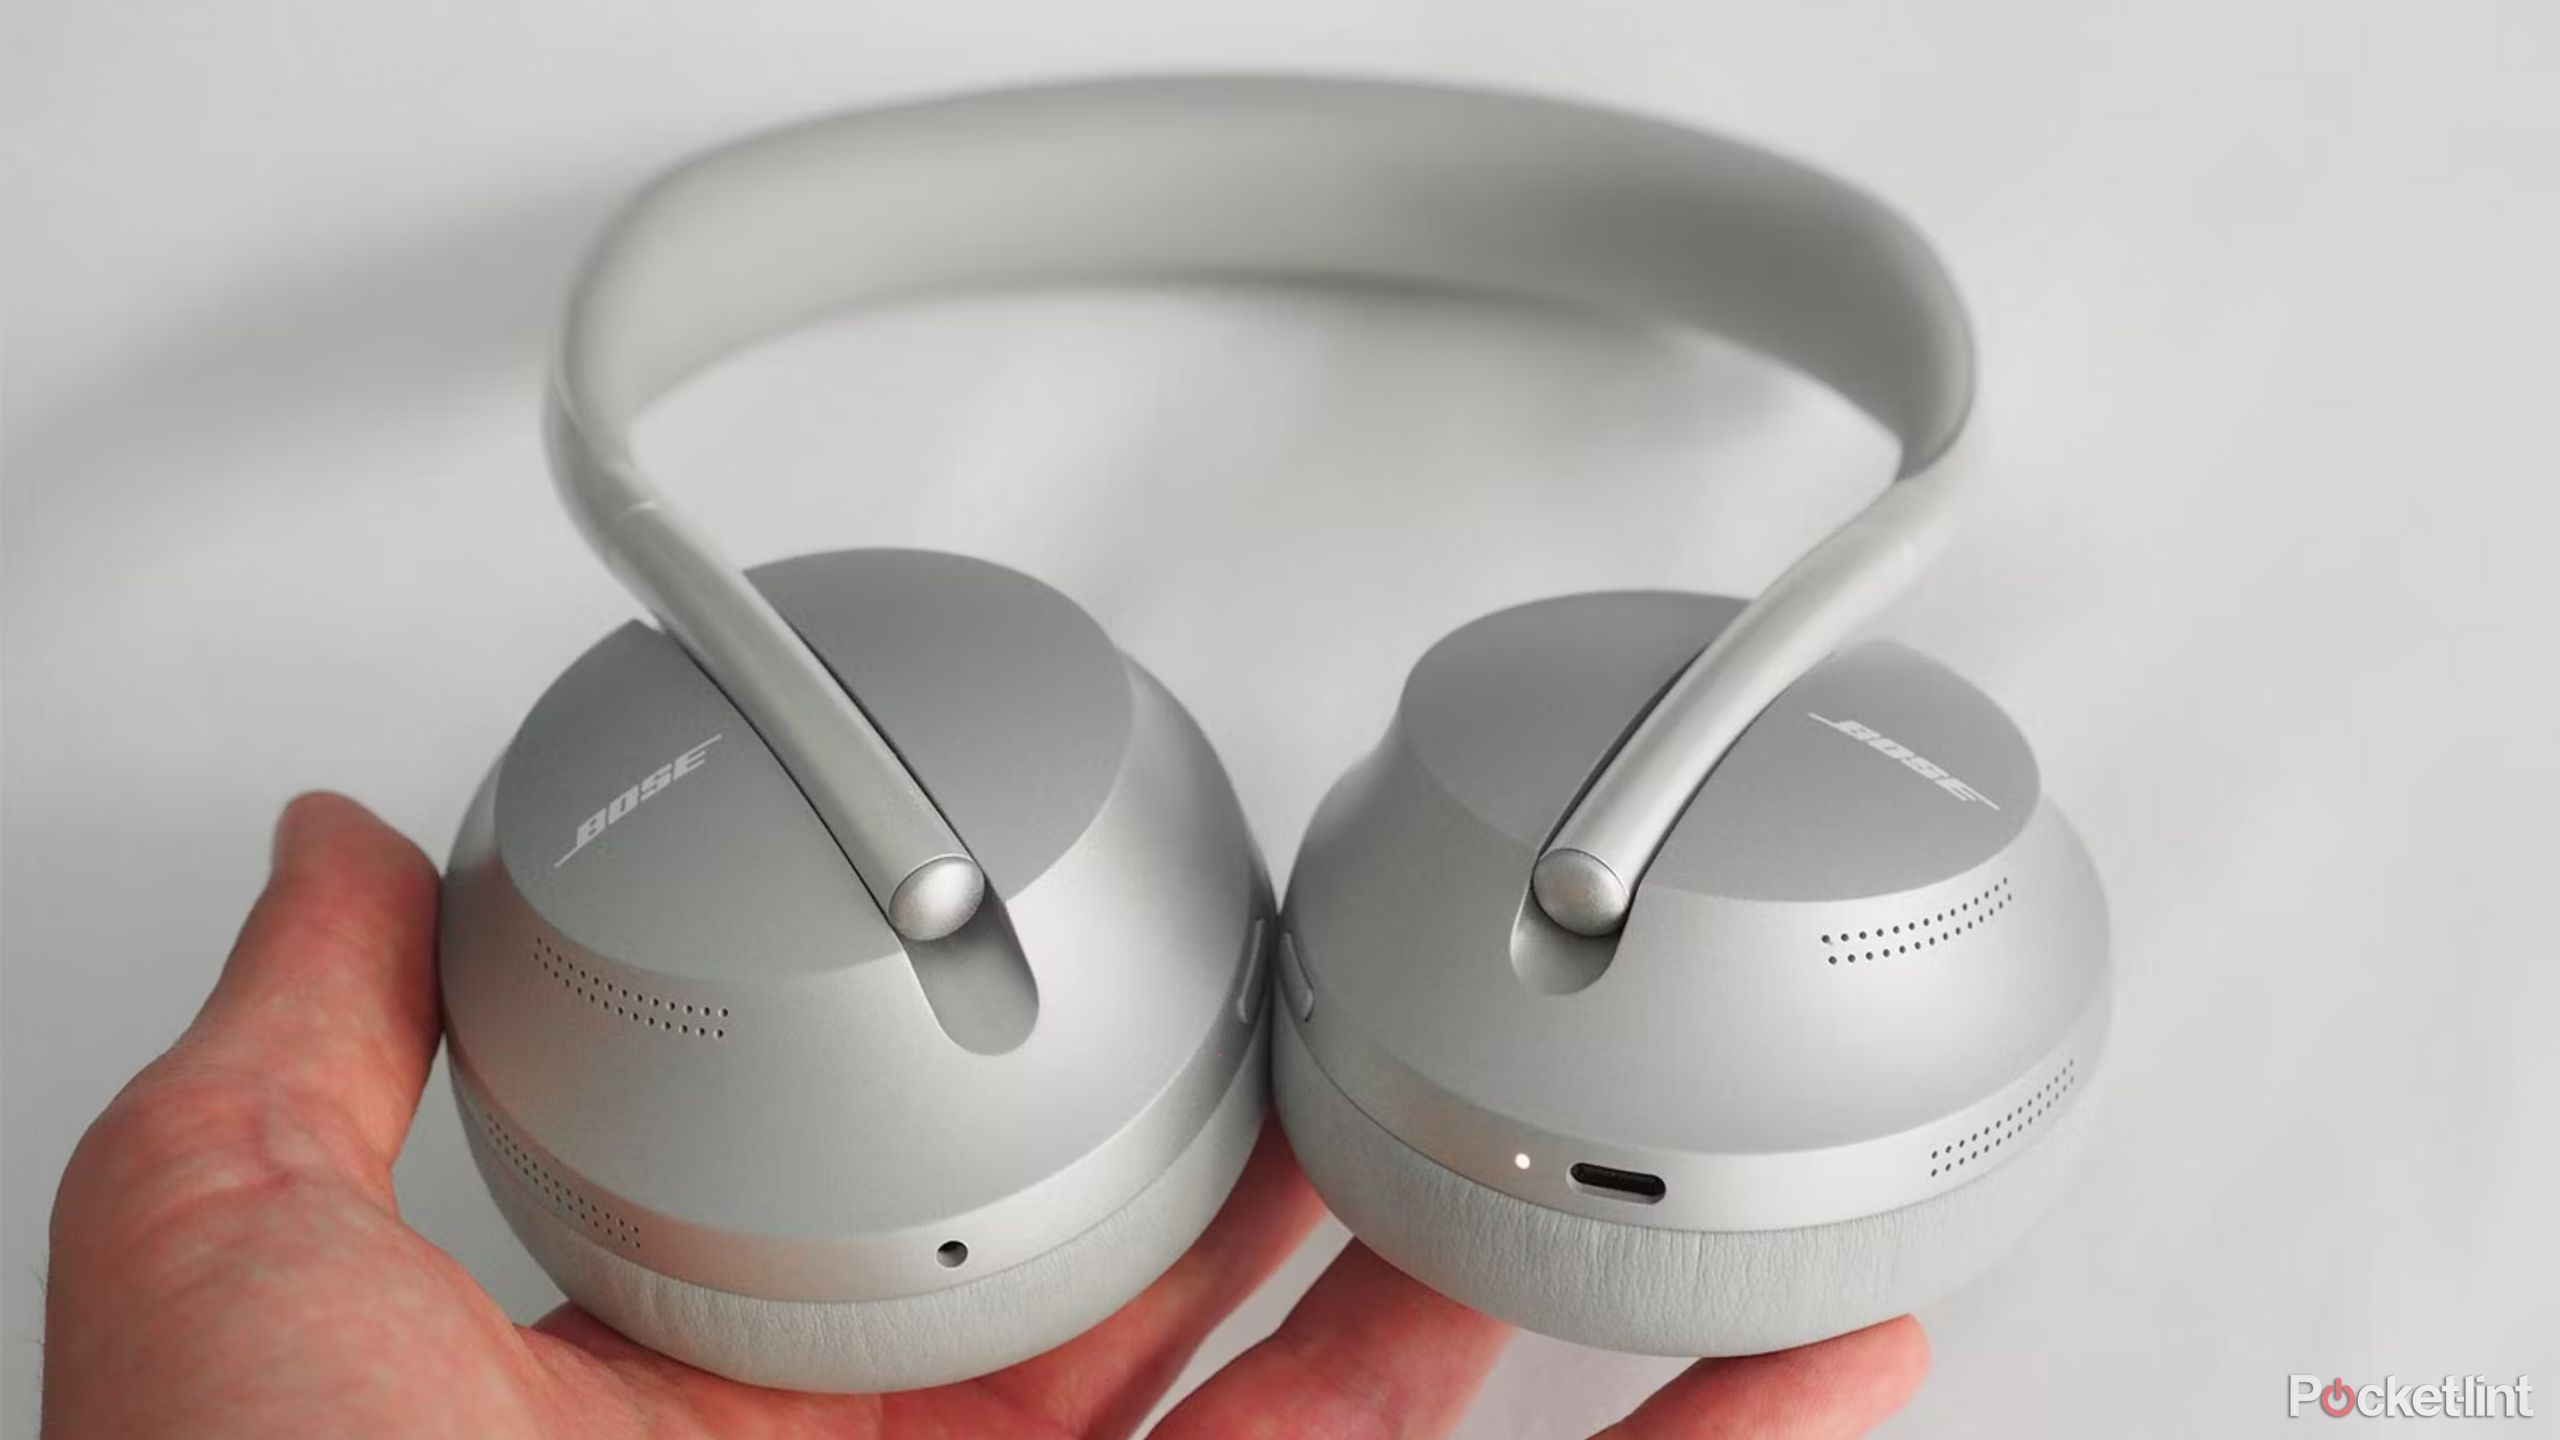 Bose NCH 700 in hand in silver. 